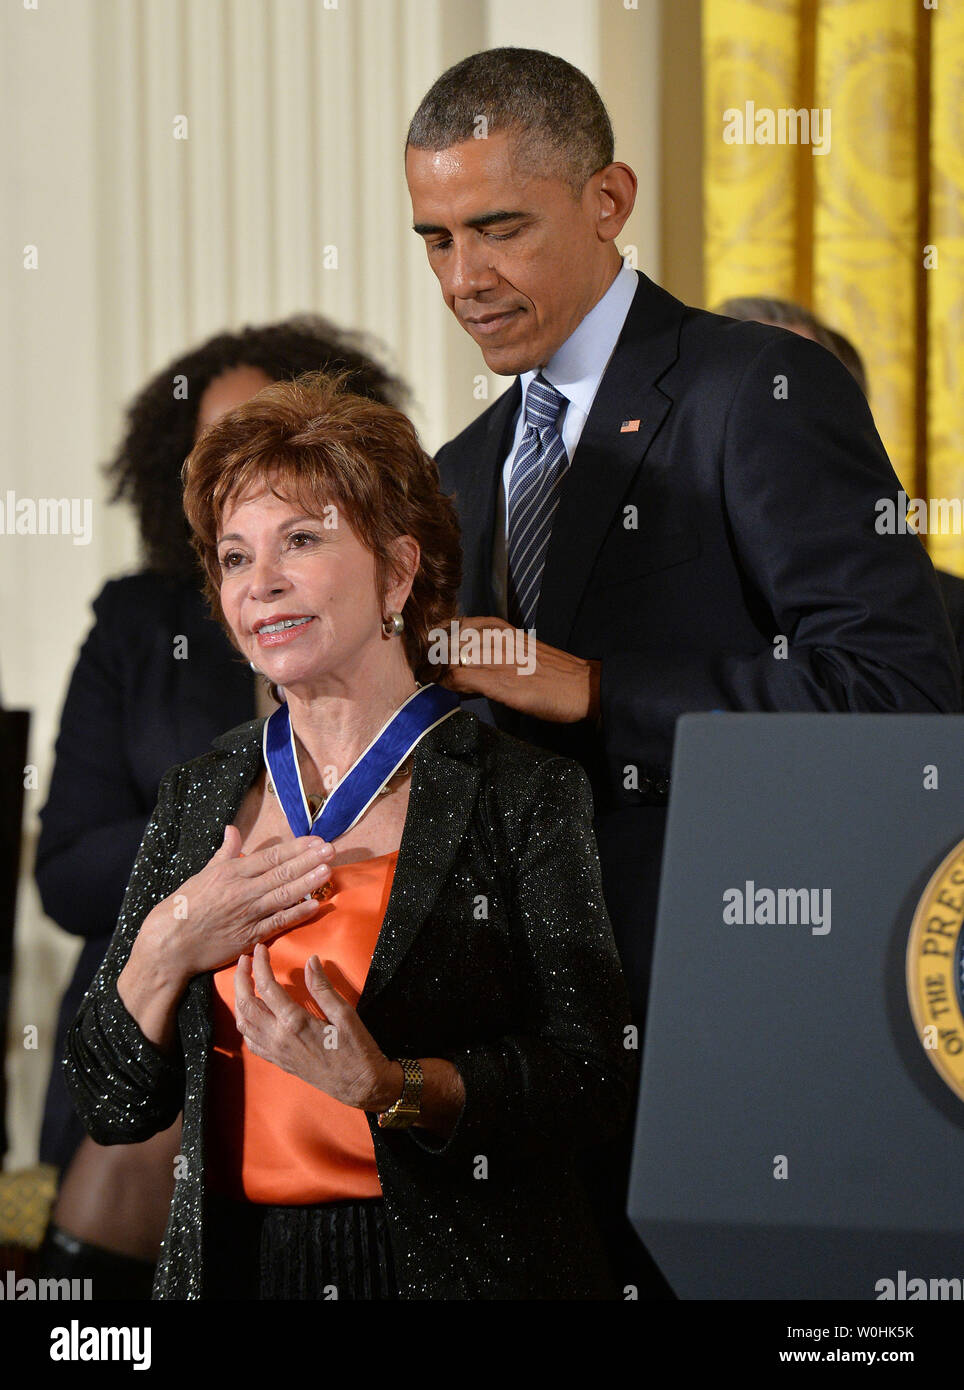 President Barack Obama awards author Isabel Allende a Presidential Medal of Freedom during a ceremony at the White House in Washington, D.C. on November 24, 2014. UPI/Kevin Dietsch Stock Photo